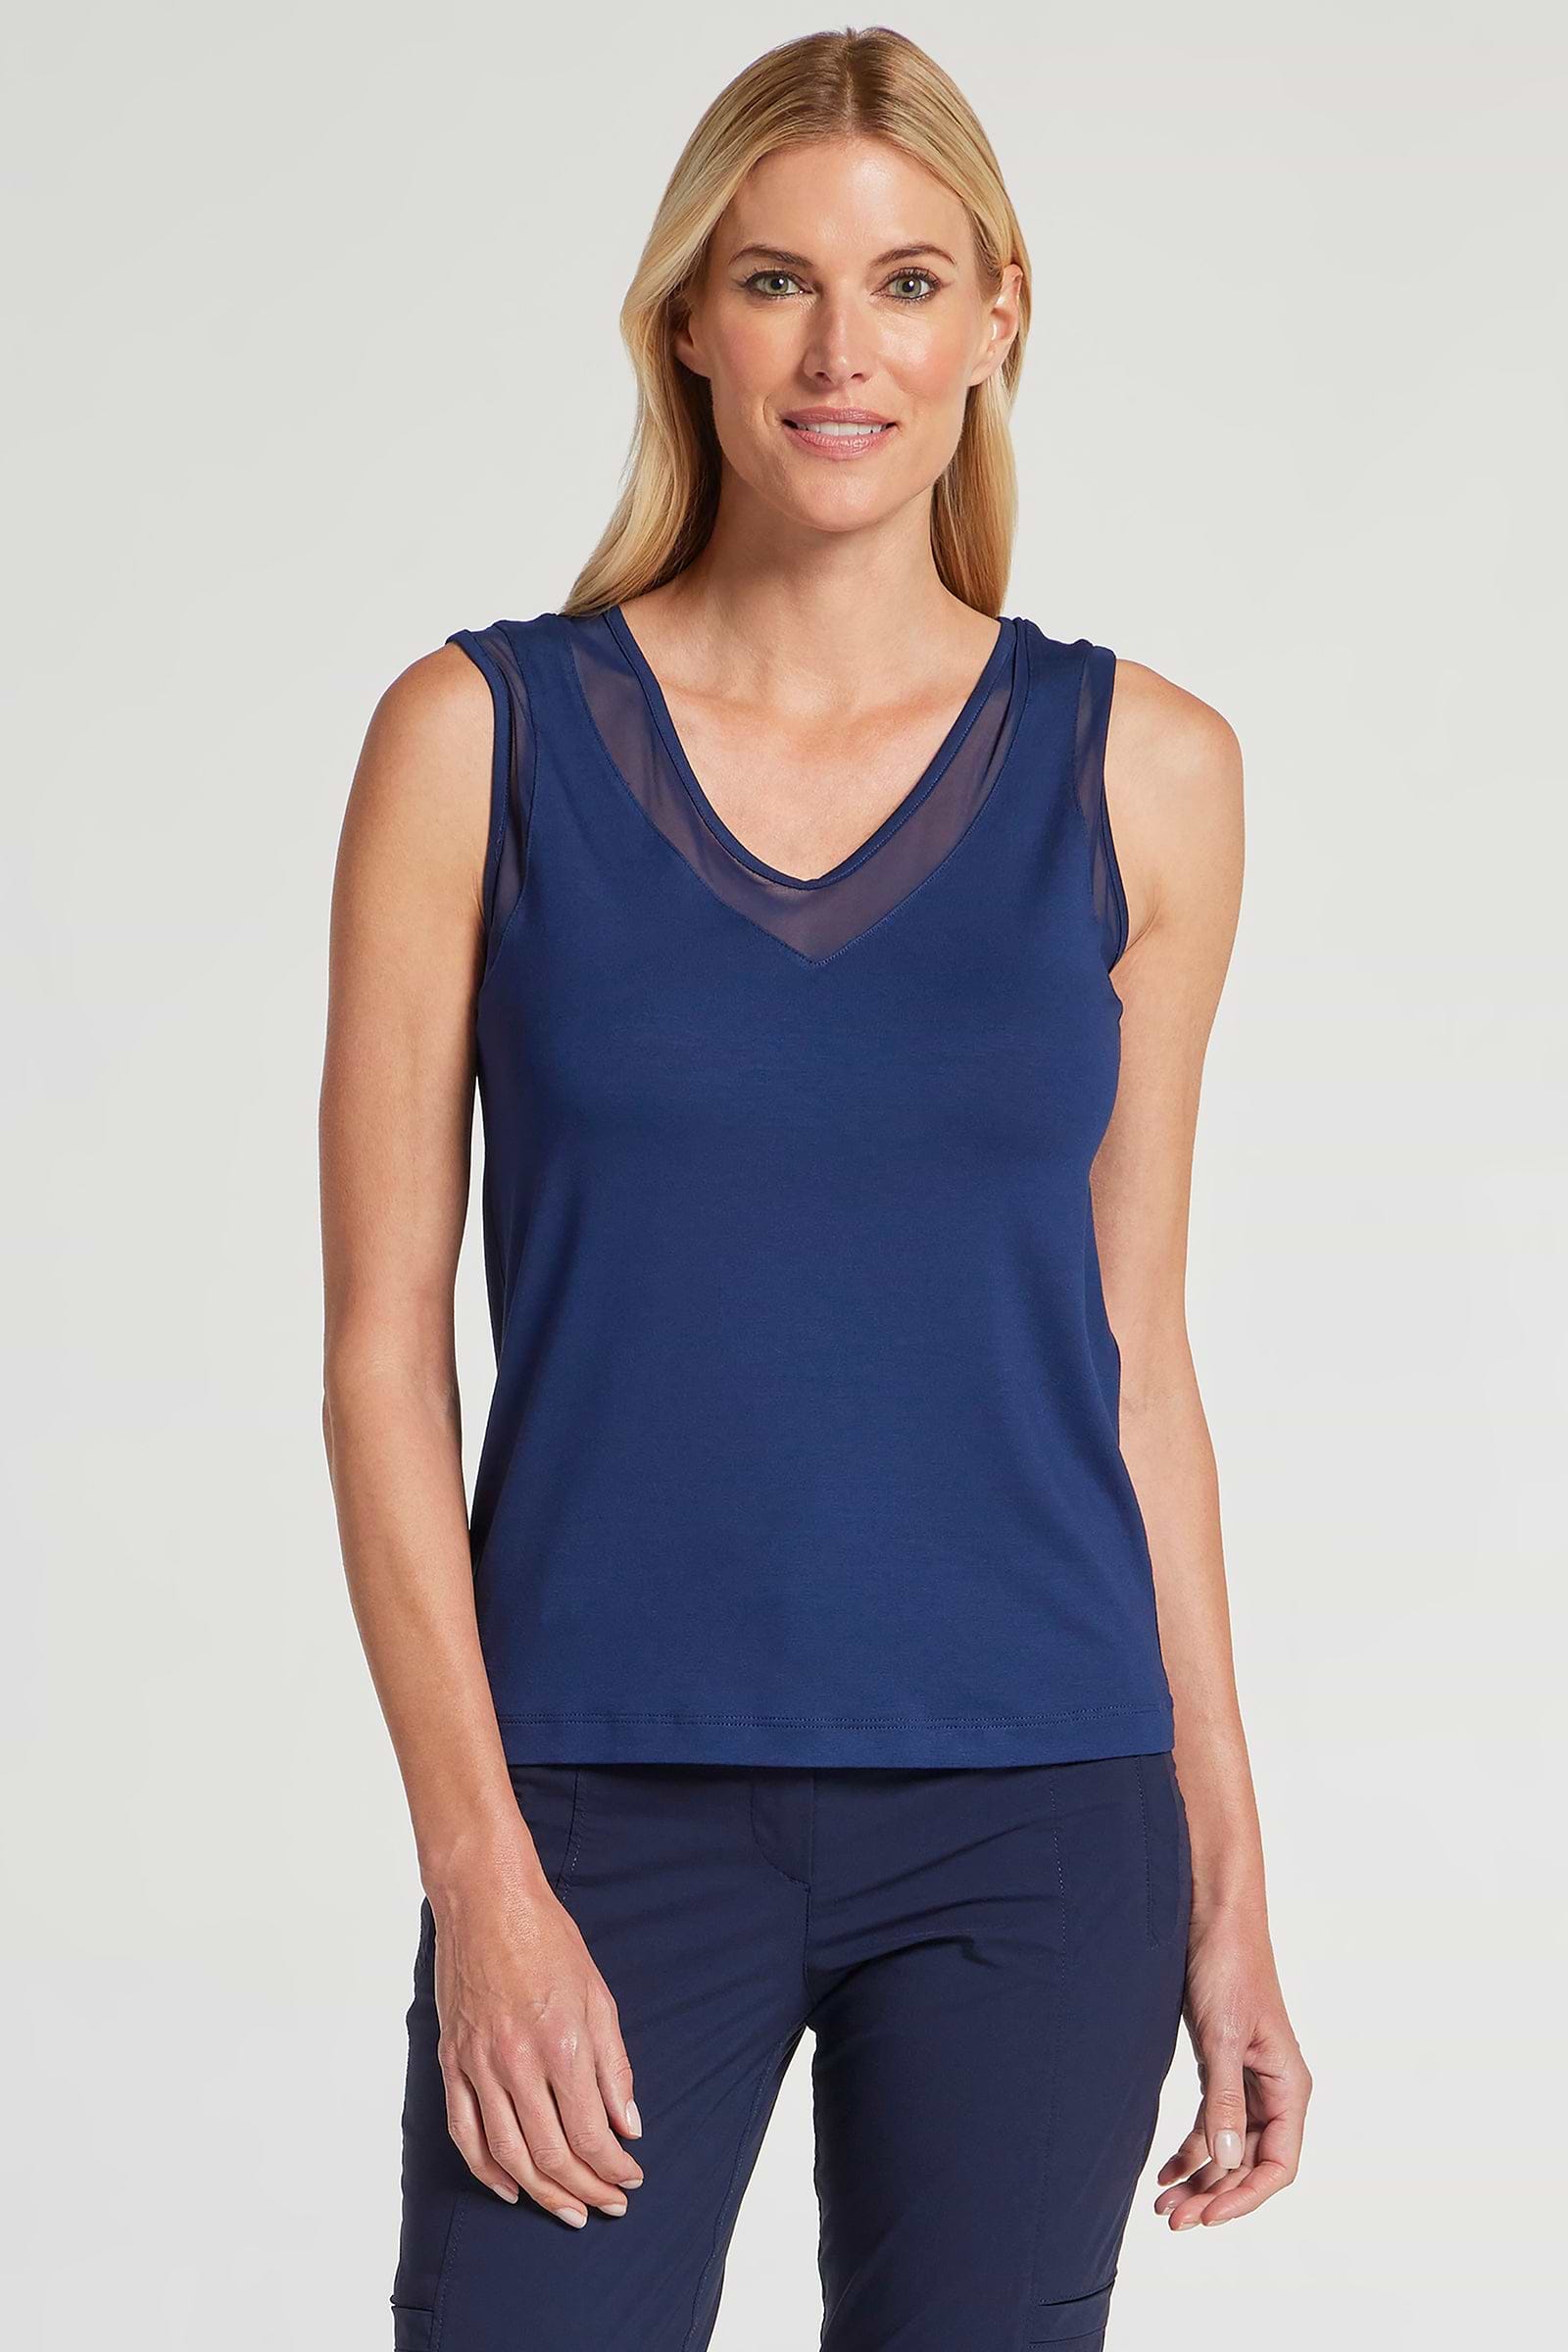 The Best Travel Tank Top. Woman Showing the Front Profile of a Jackson Pima Tank in Navy.